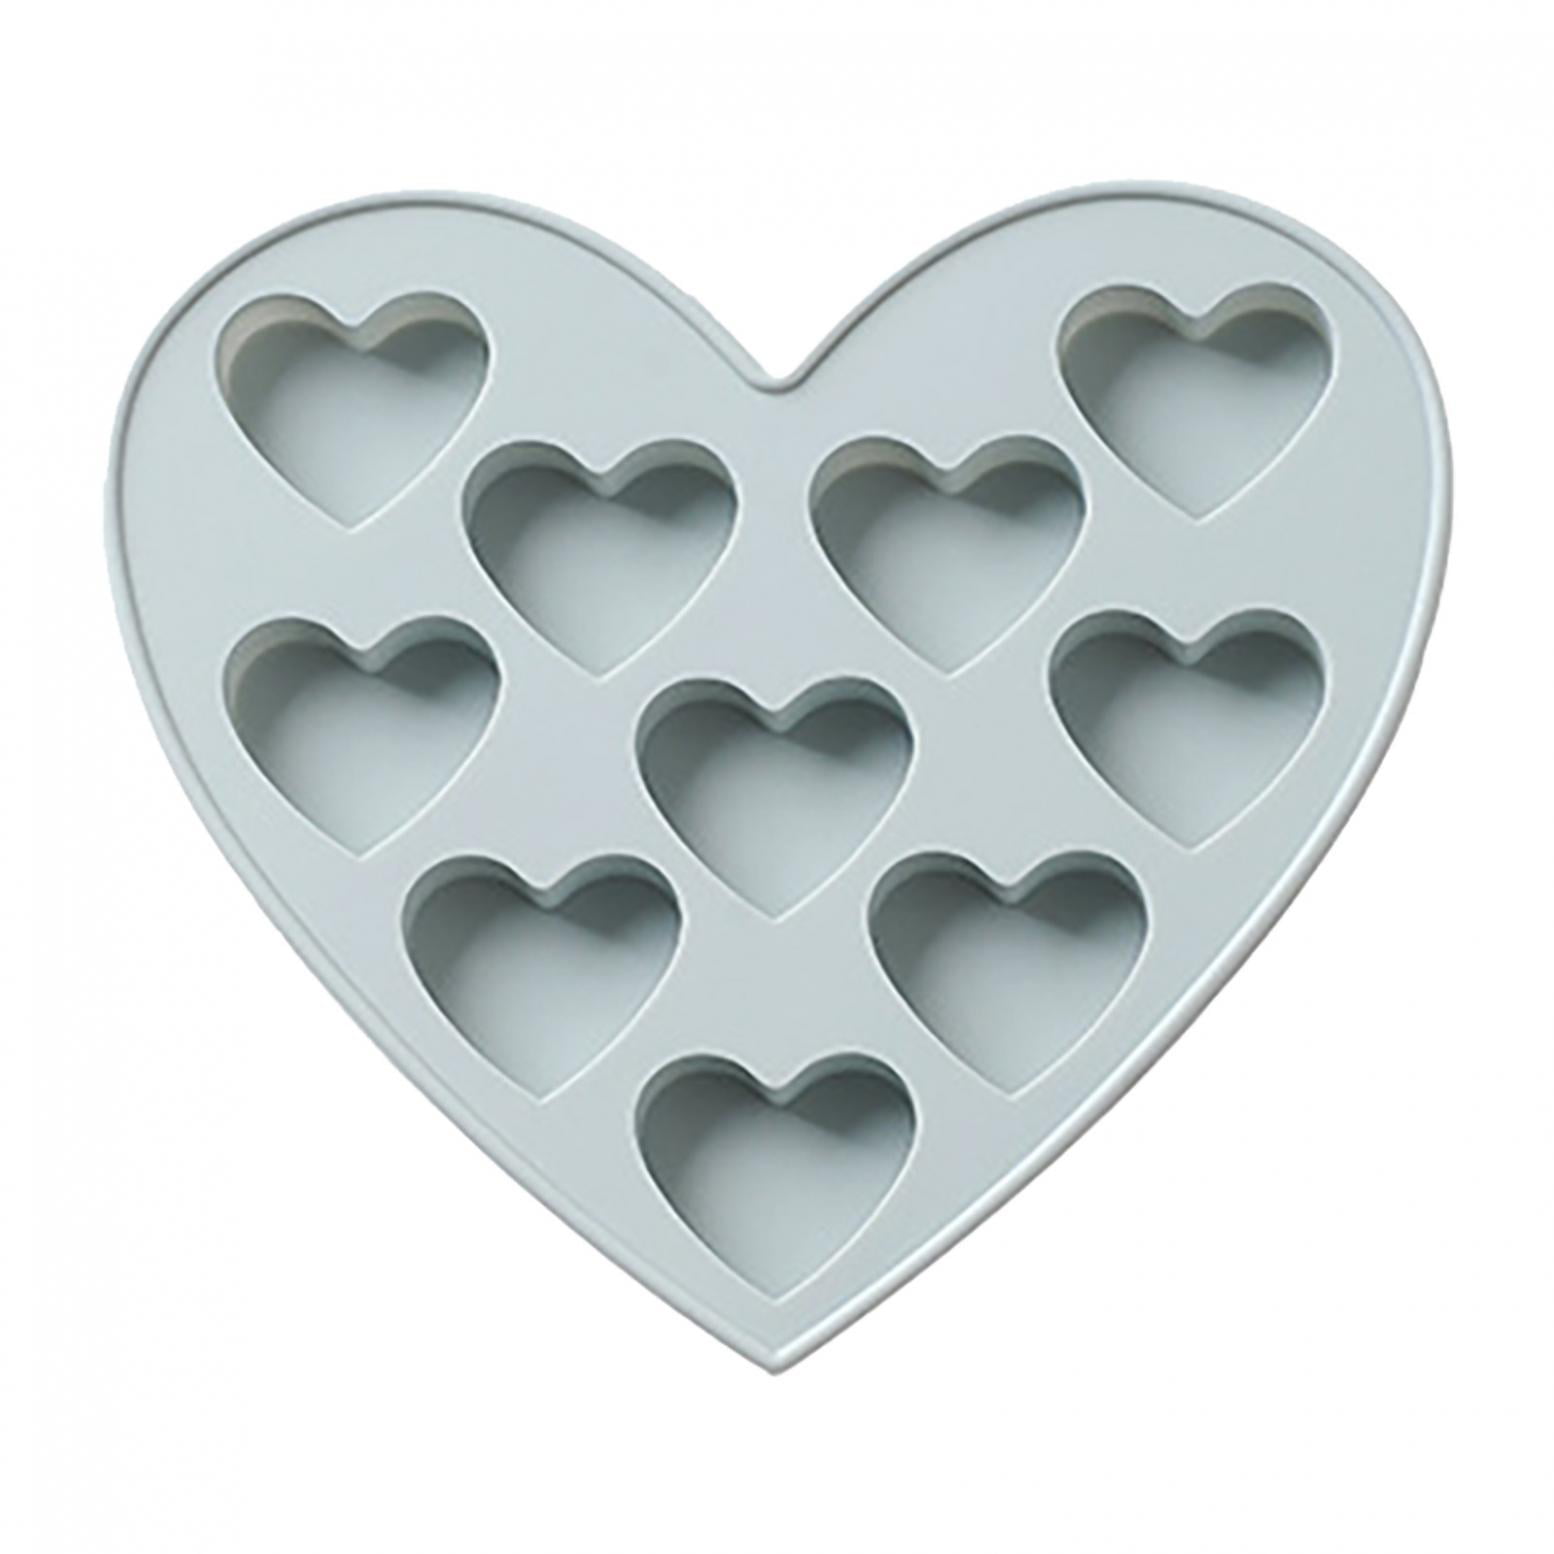 6 Cavity Heart Silicone Molds Mould for Baking Chocolate Candy Cookies Soap 